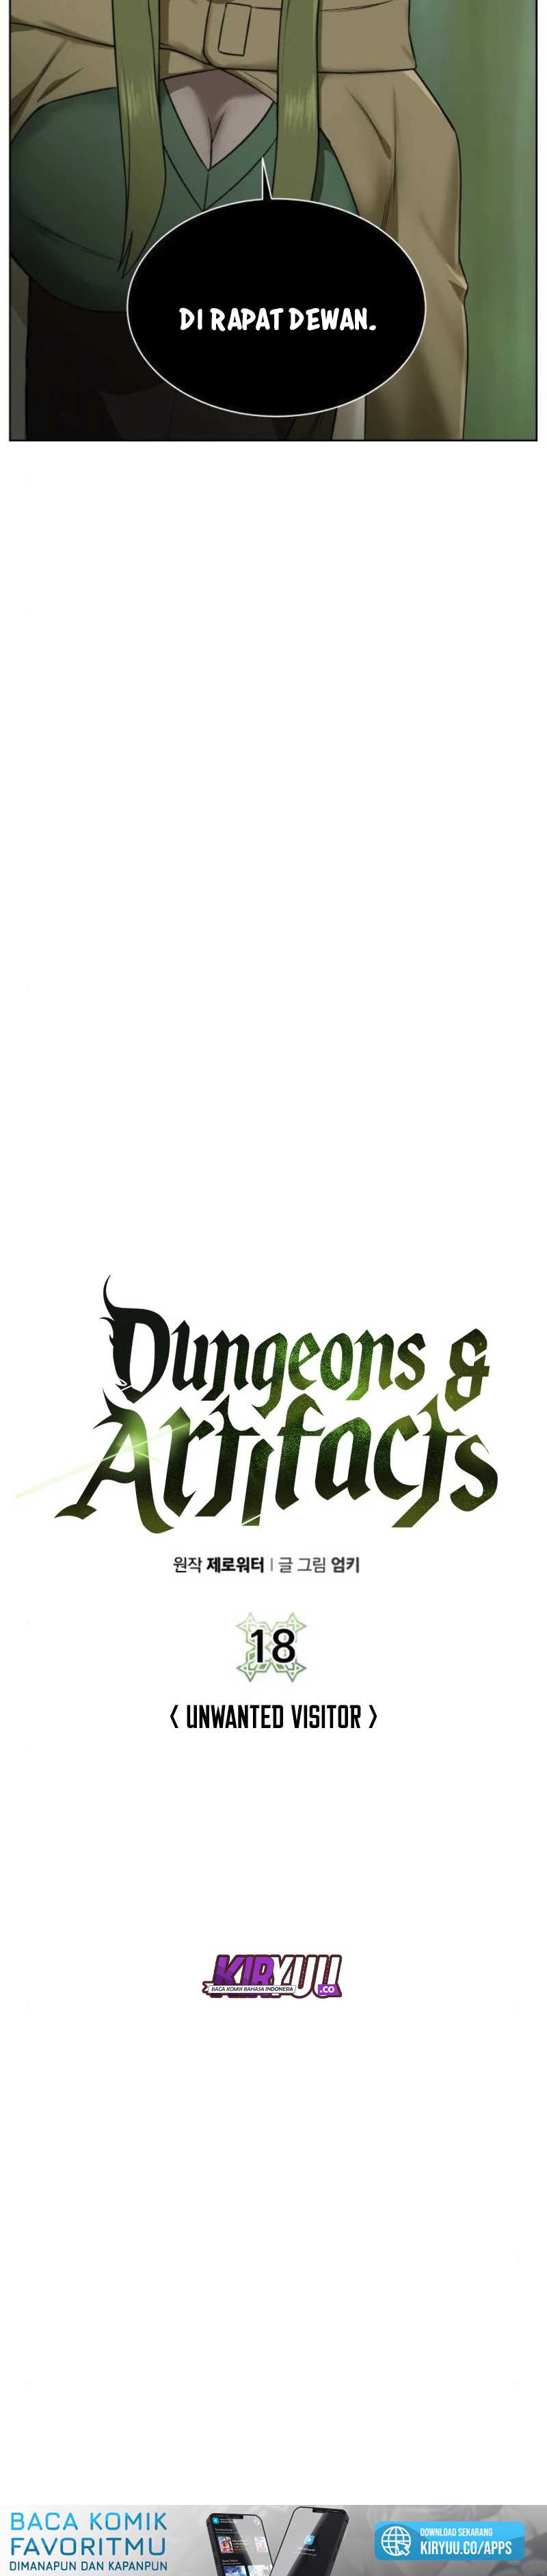 dungeons-artifacts Chapter chapter-18